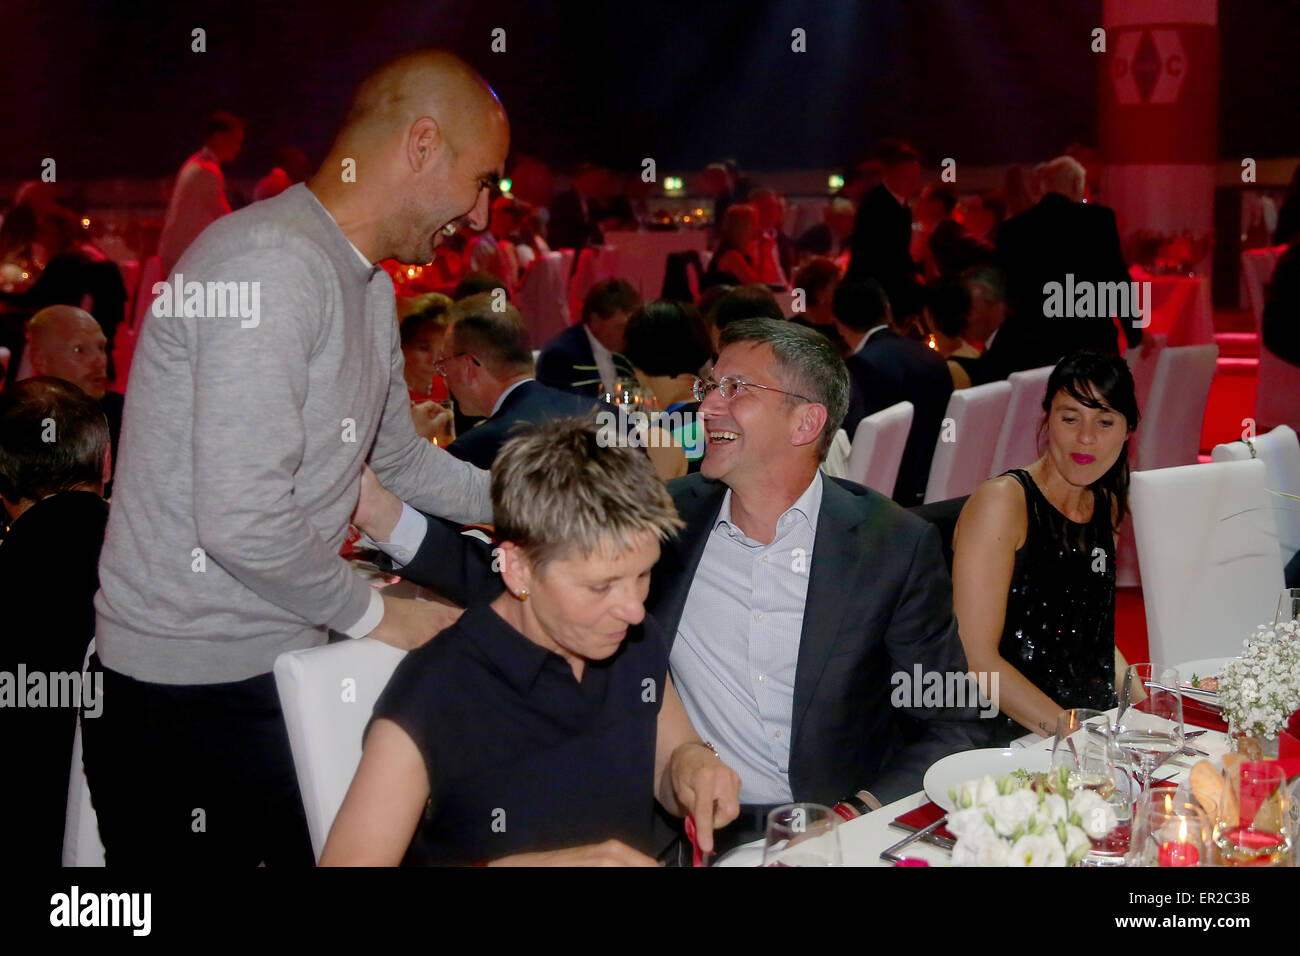 Munich, Germany. 23rd May, 2015.  Josep Guardiola, head coach of Bayern Muenchen talks to Herbert Hainer, CEO of adidas group during the FC Bayern Muenchen Bundesliga Champions Dinner at Postpalast on May 23, 2015 in Munich, Germany. Credit:  kolvenbach/Alamy Live News Stock Photo